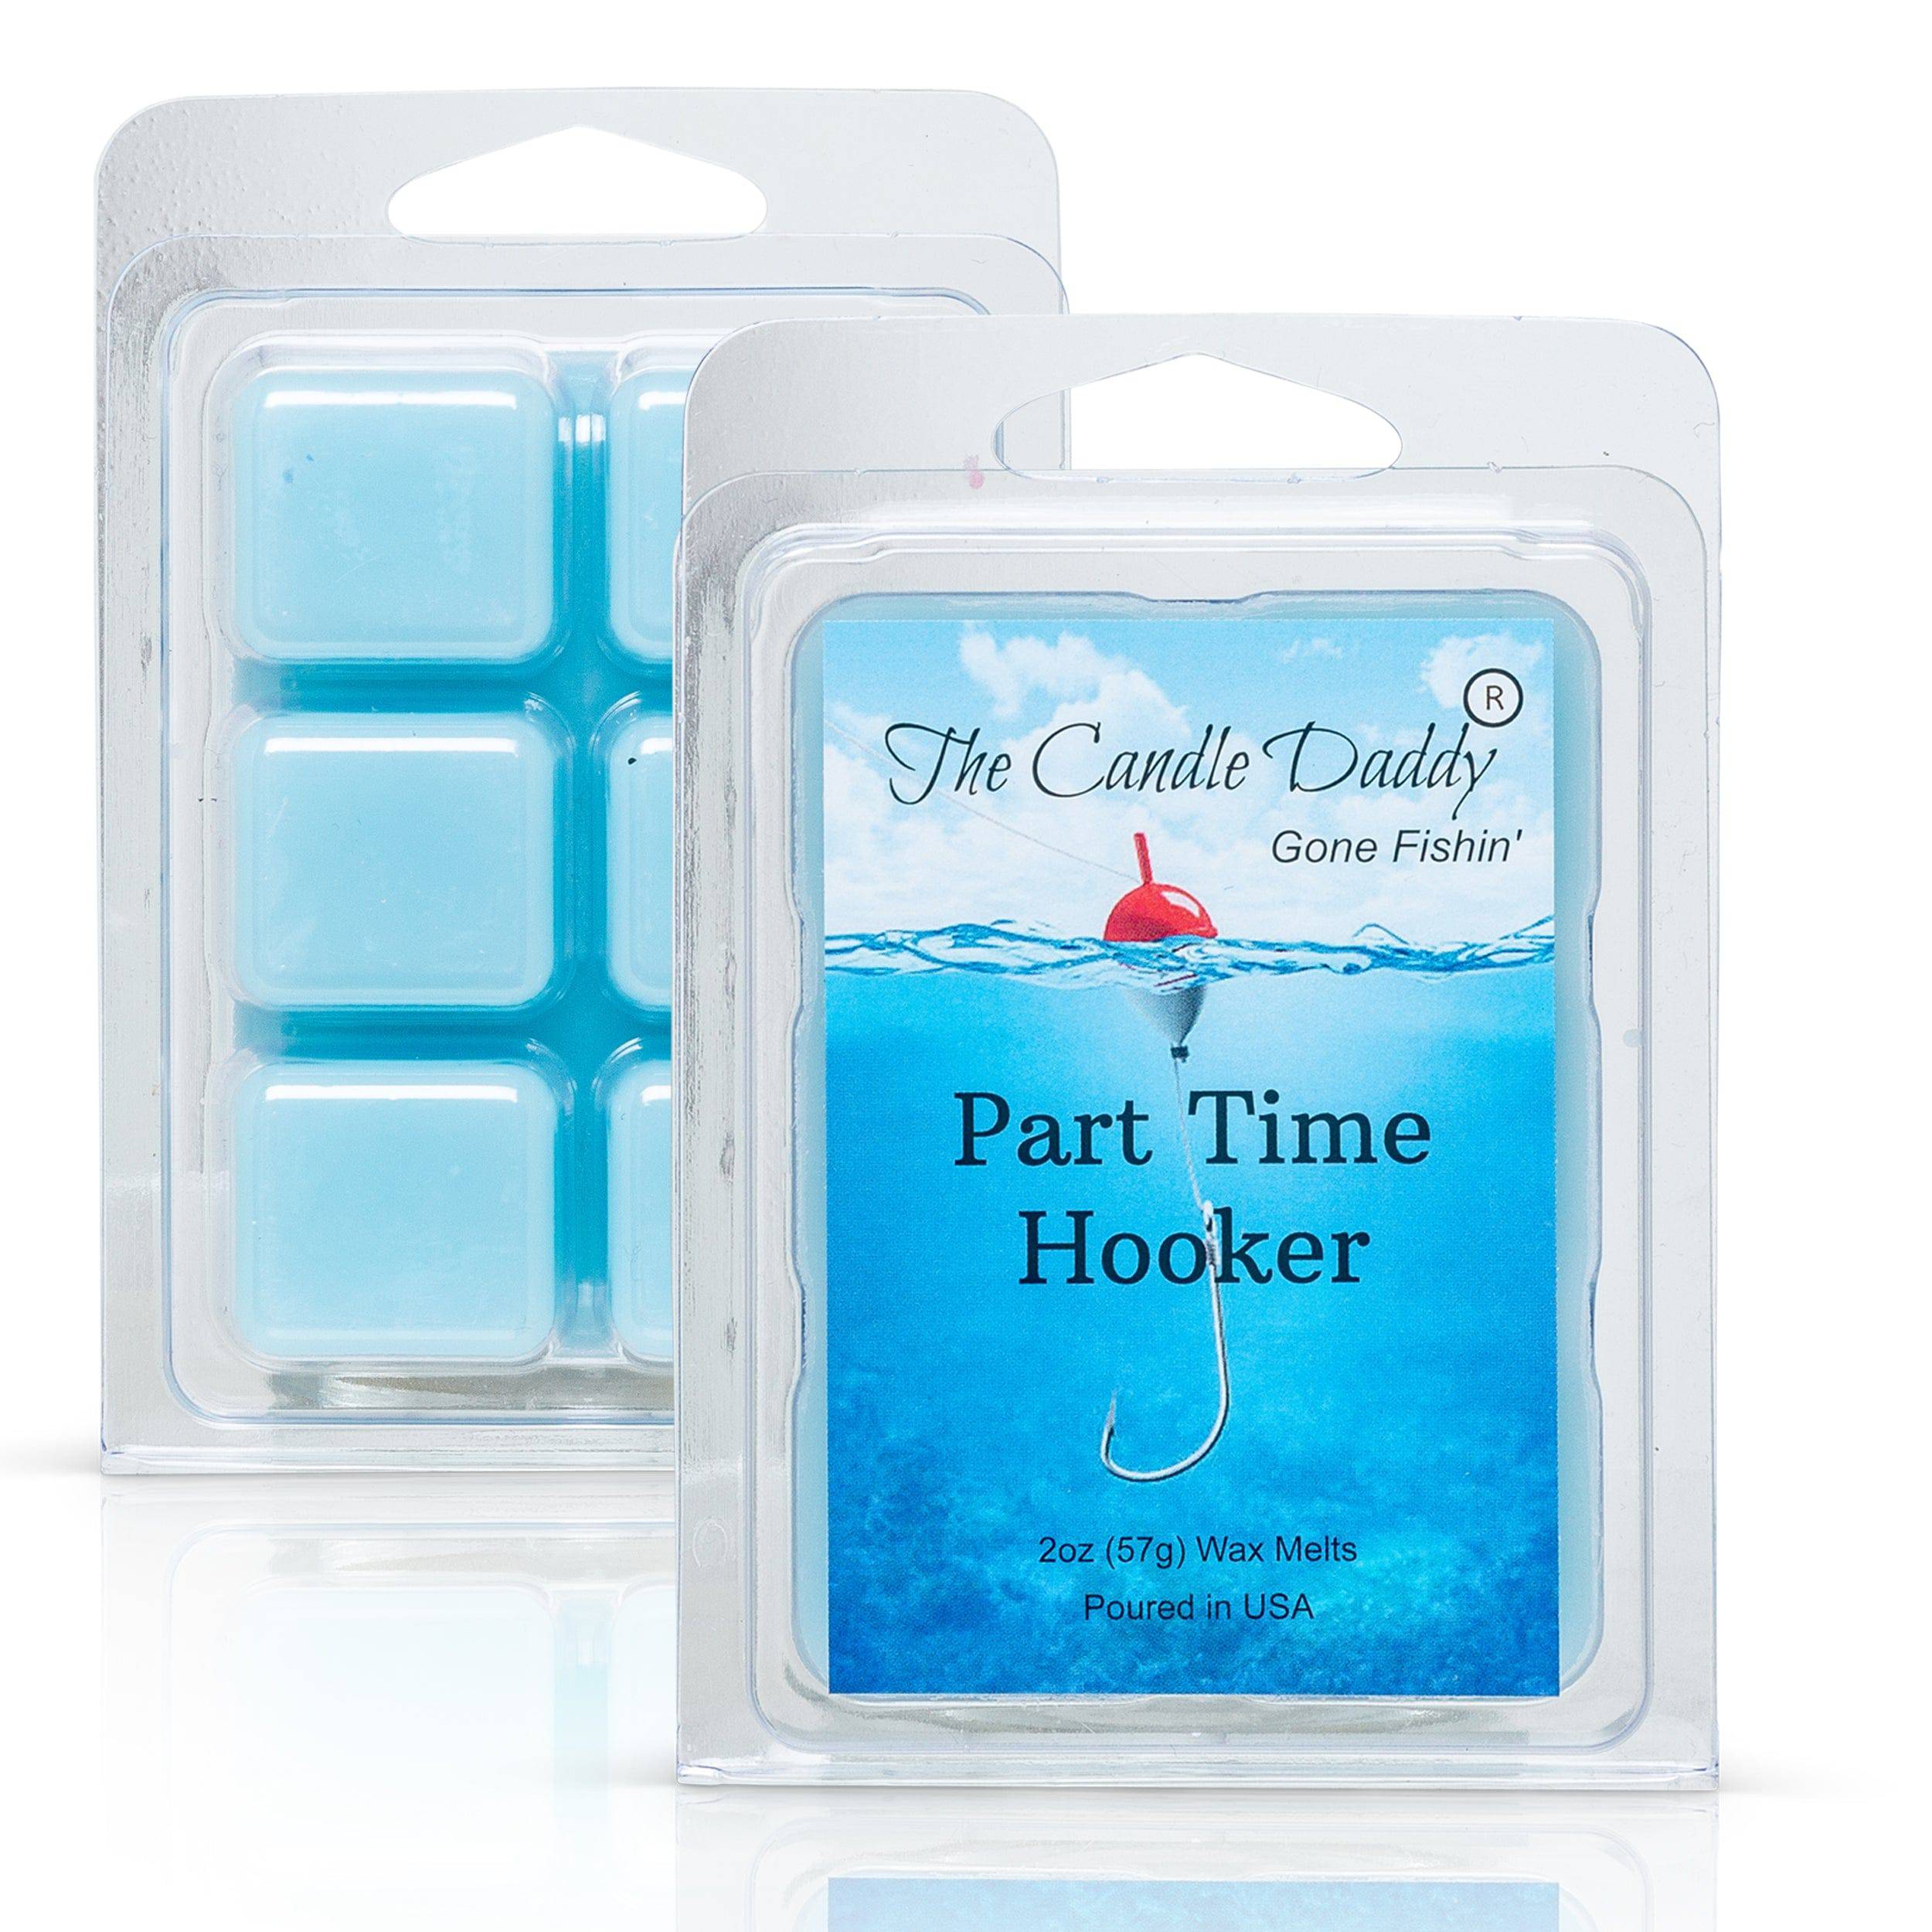 5 Pack - The Candle Daddy's Gone Fishin' - Tug It Jerk It & Mount